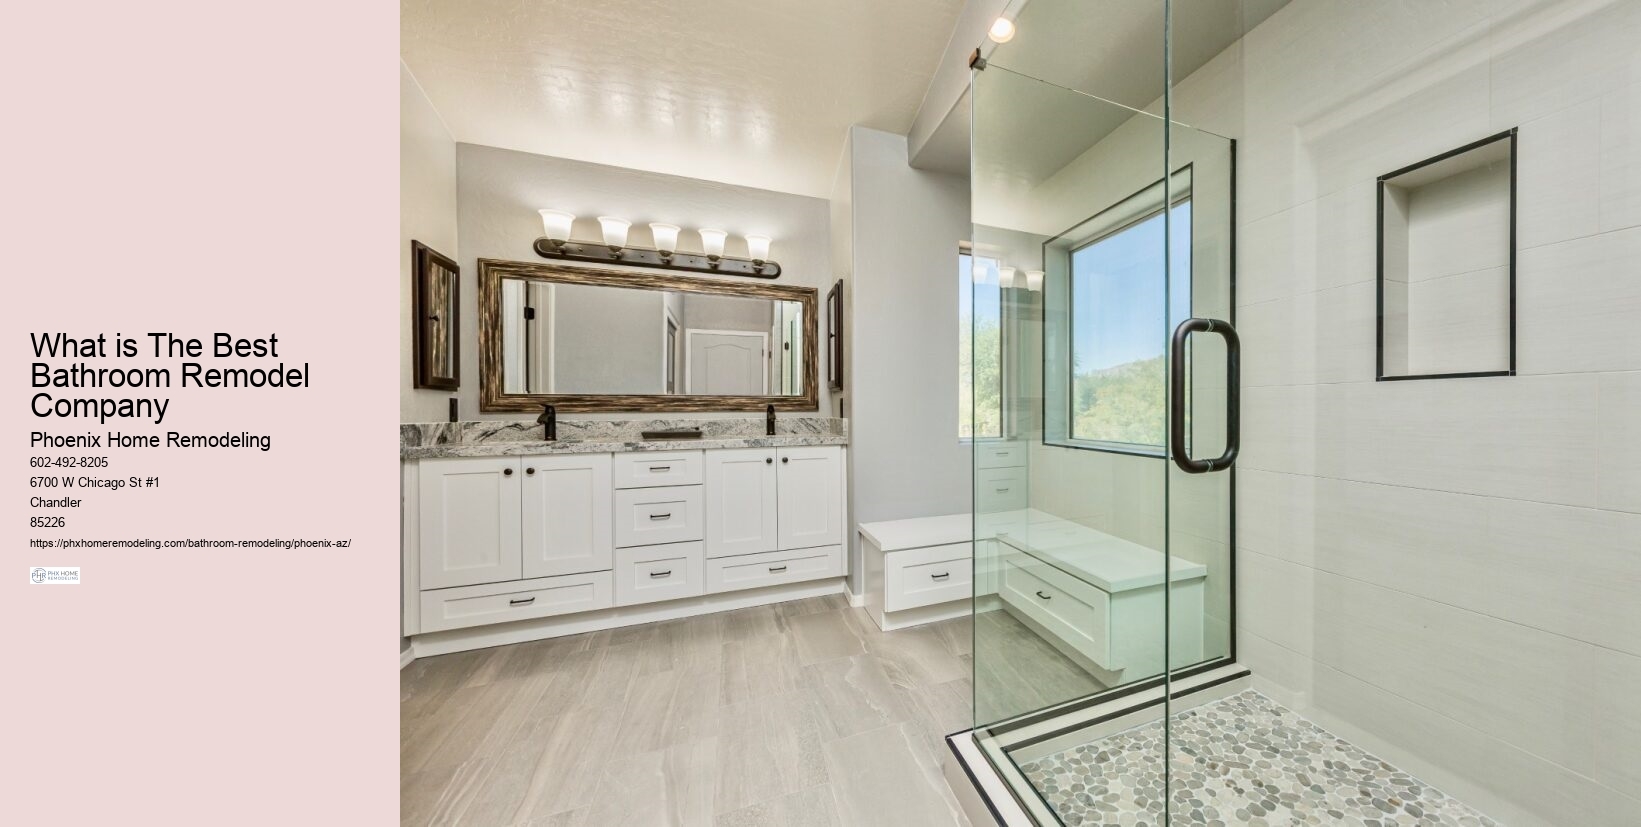 What is The Best Bathroom Remodel Company